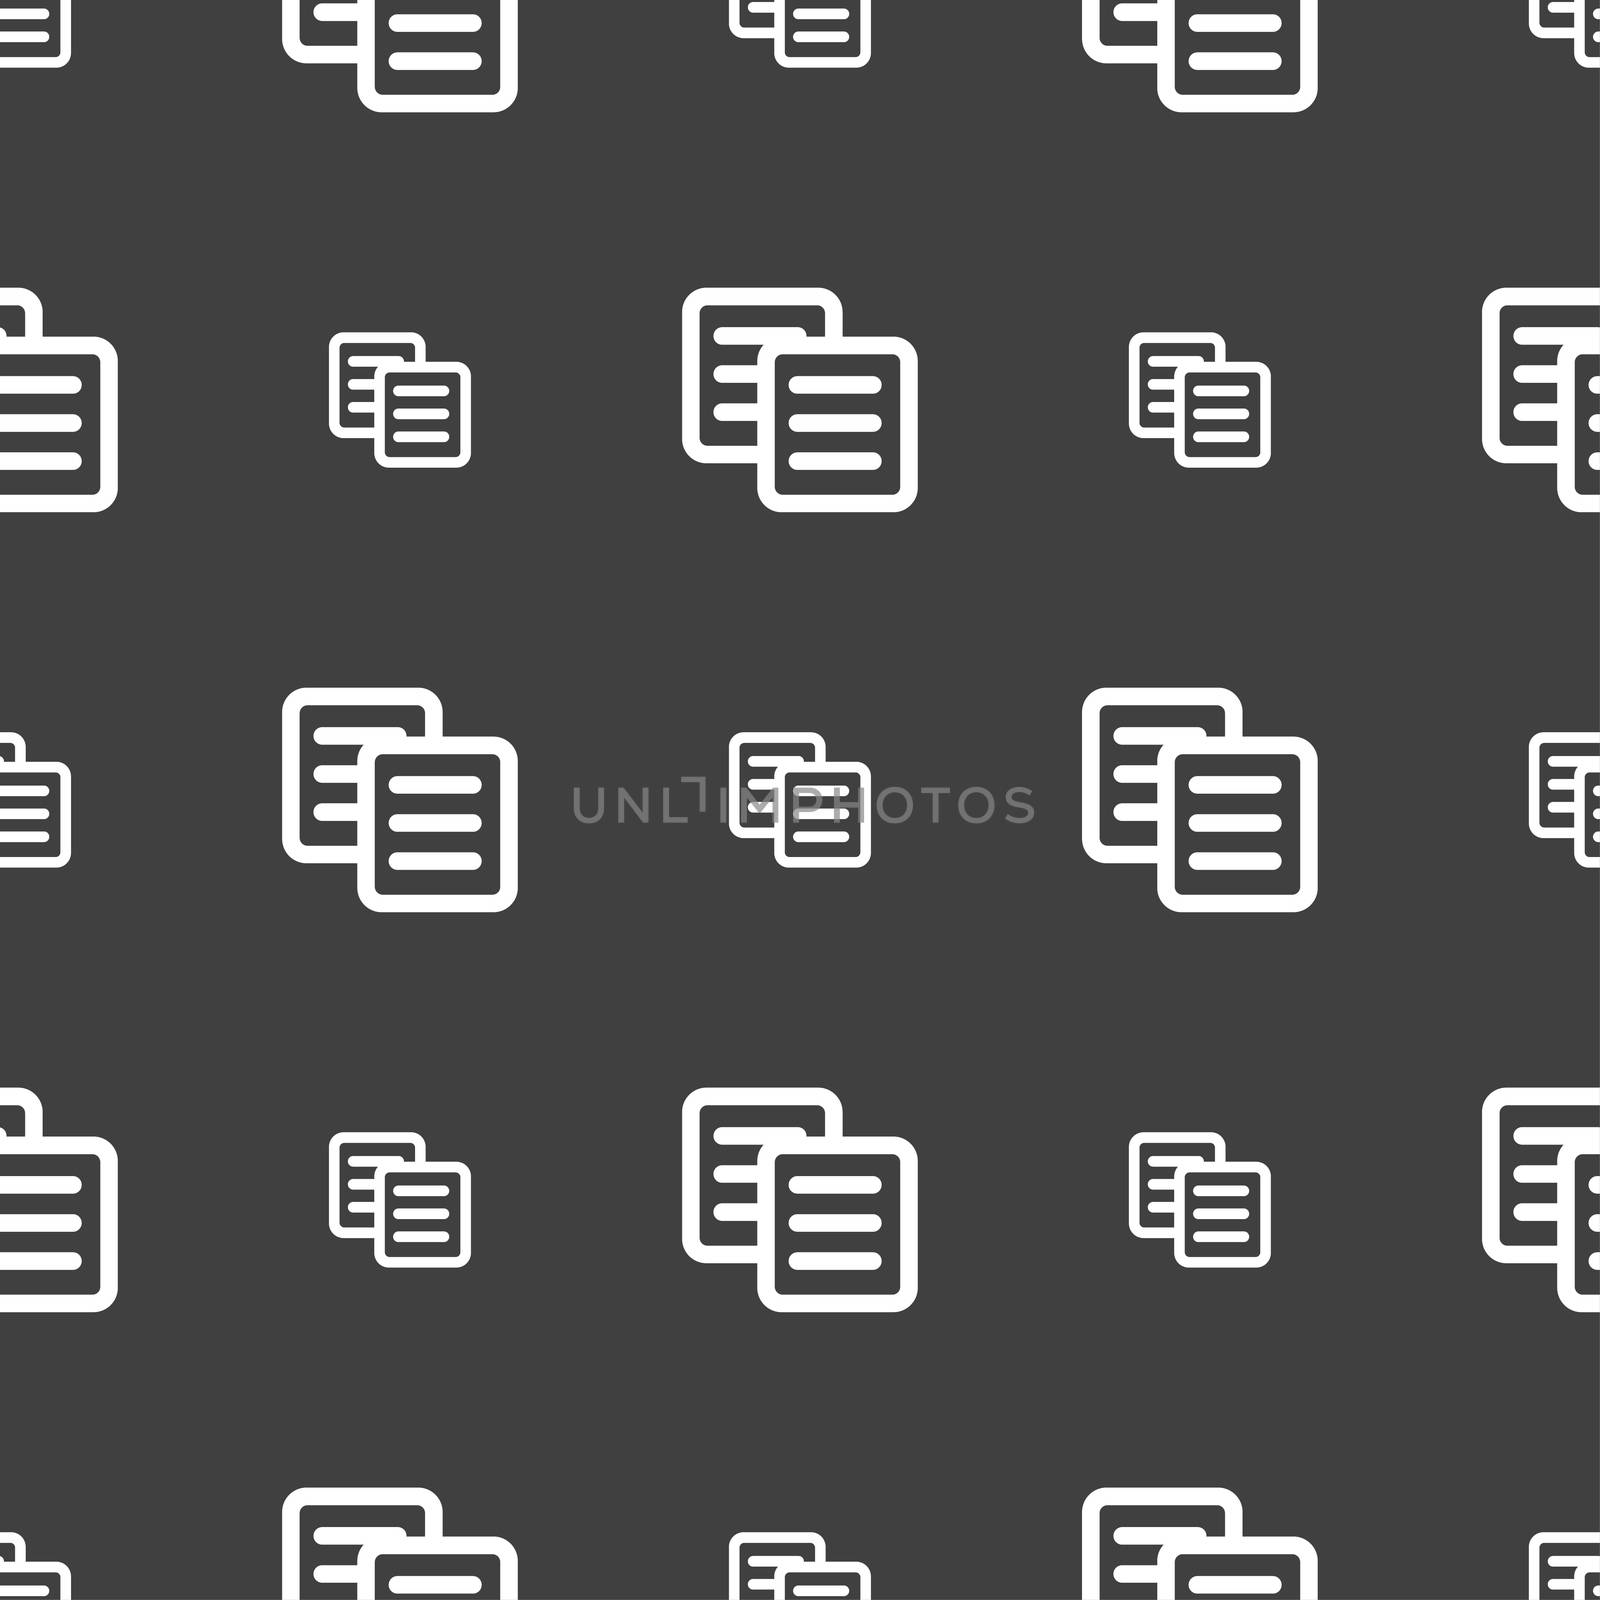 copy icon sign. Seamless pattern on a gray background. illustration